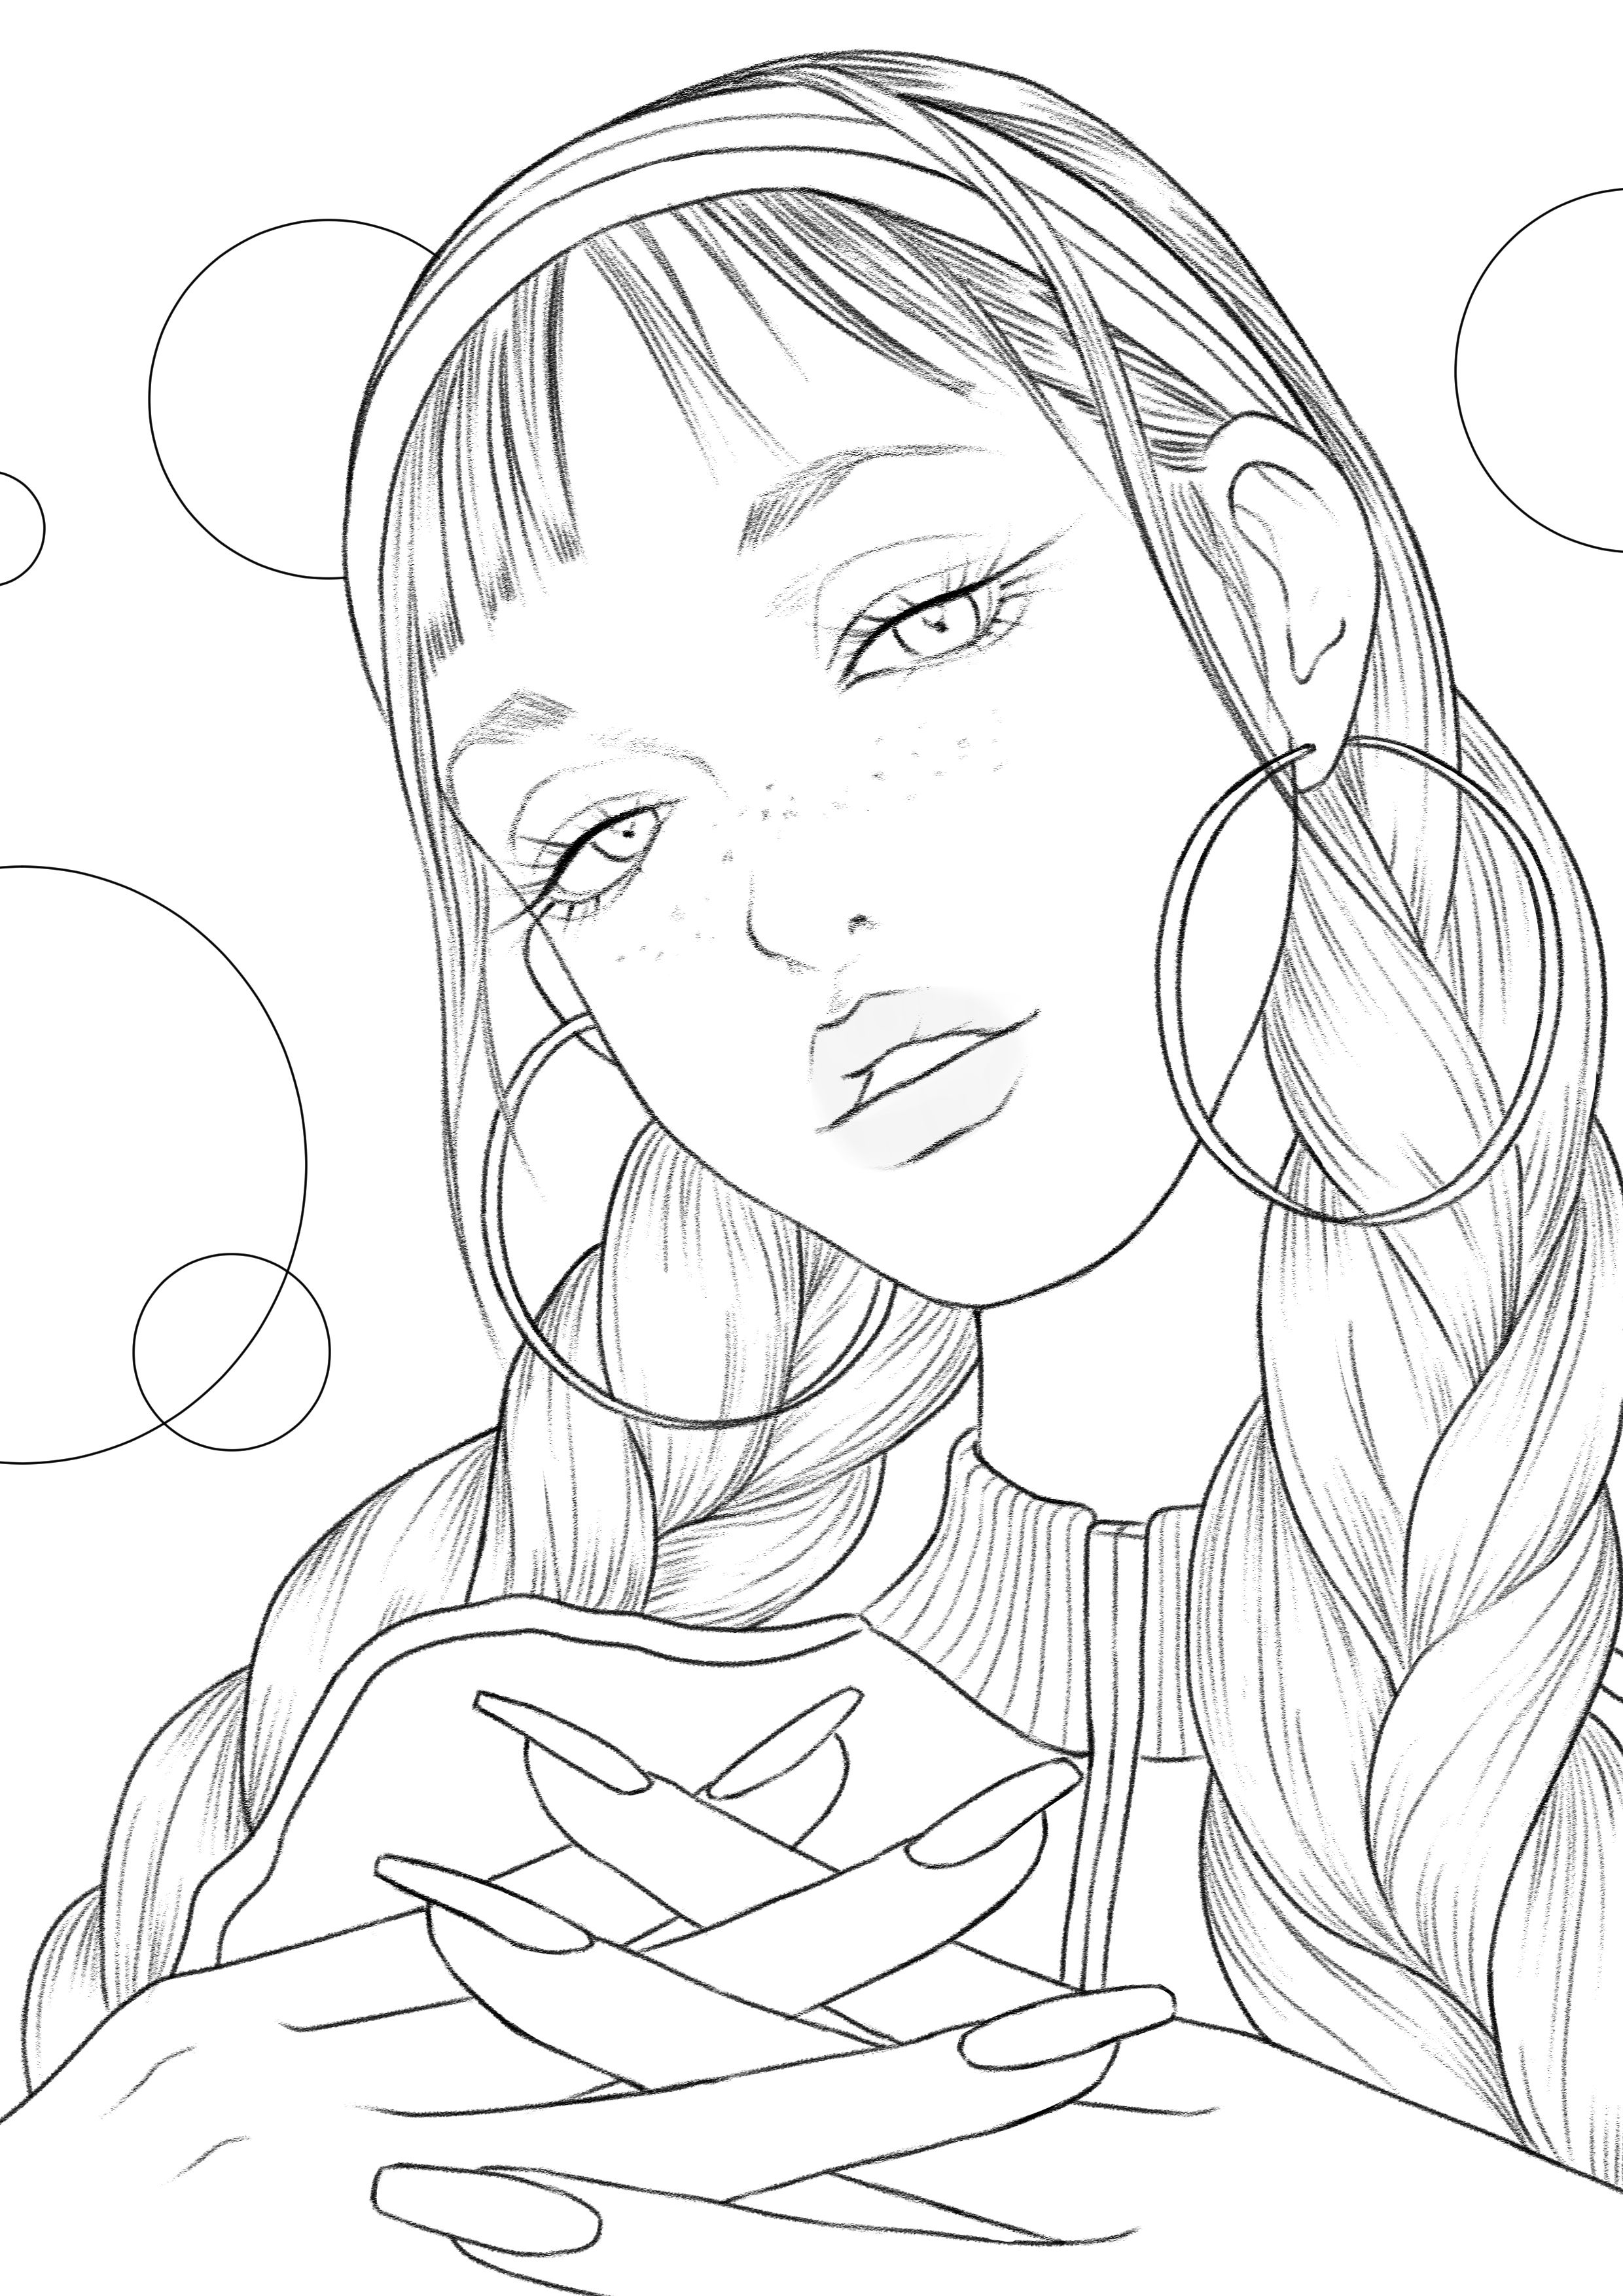 Retro girl coloring page for adults printable coloring page